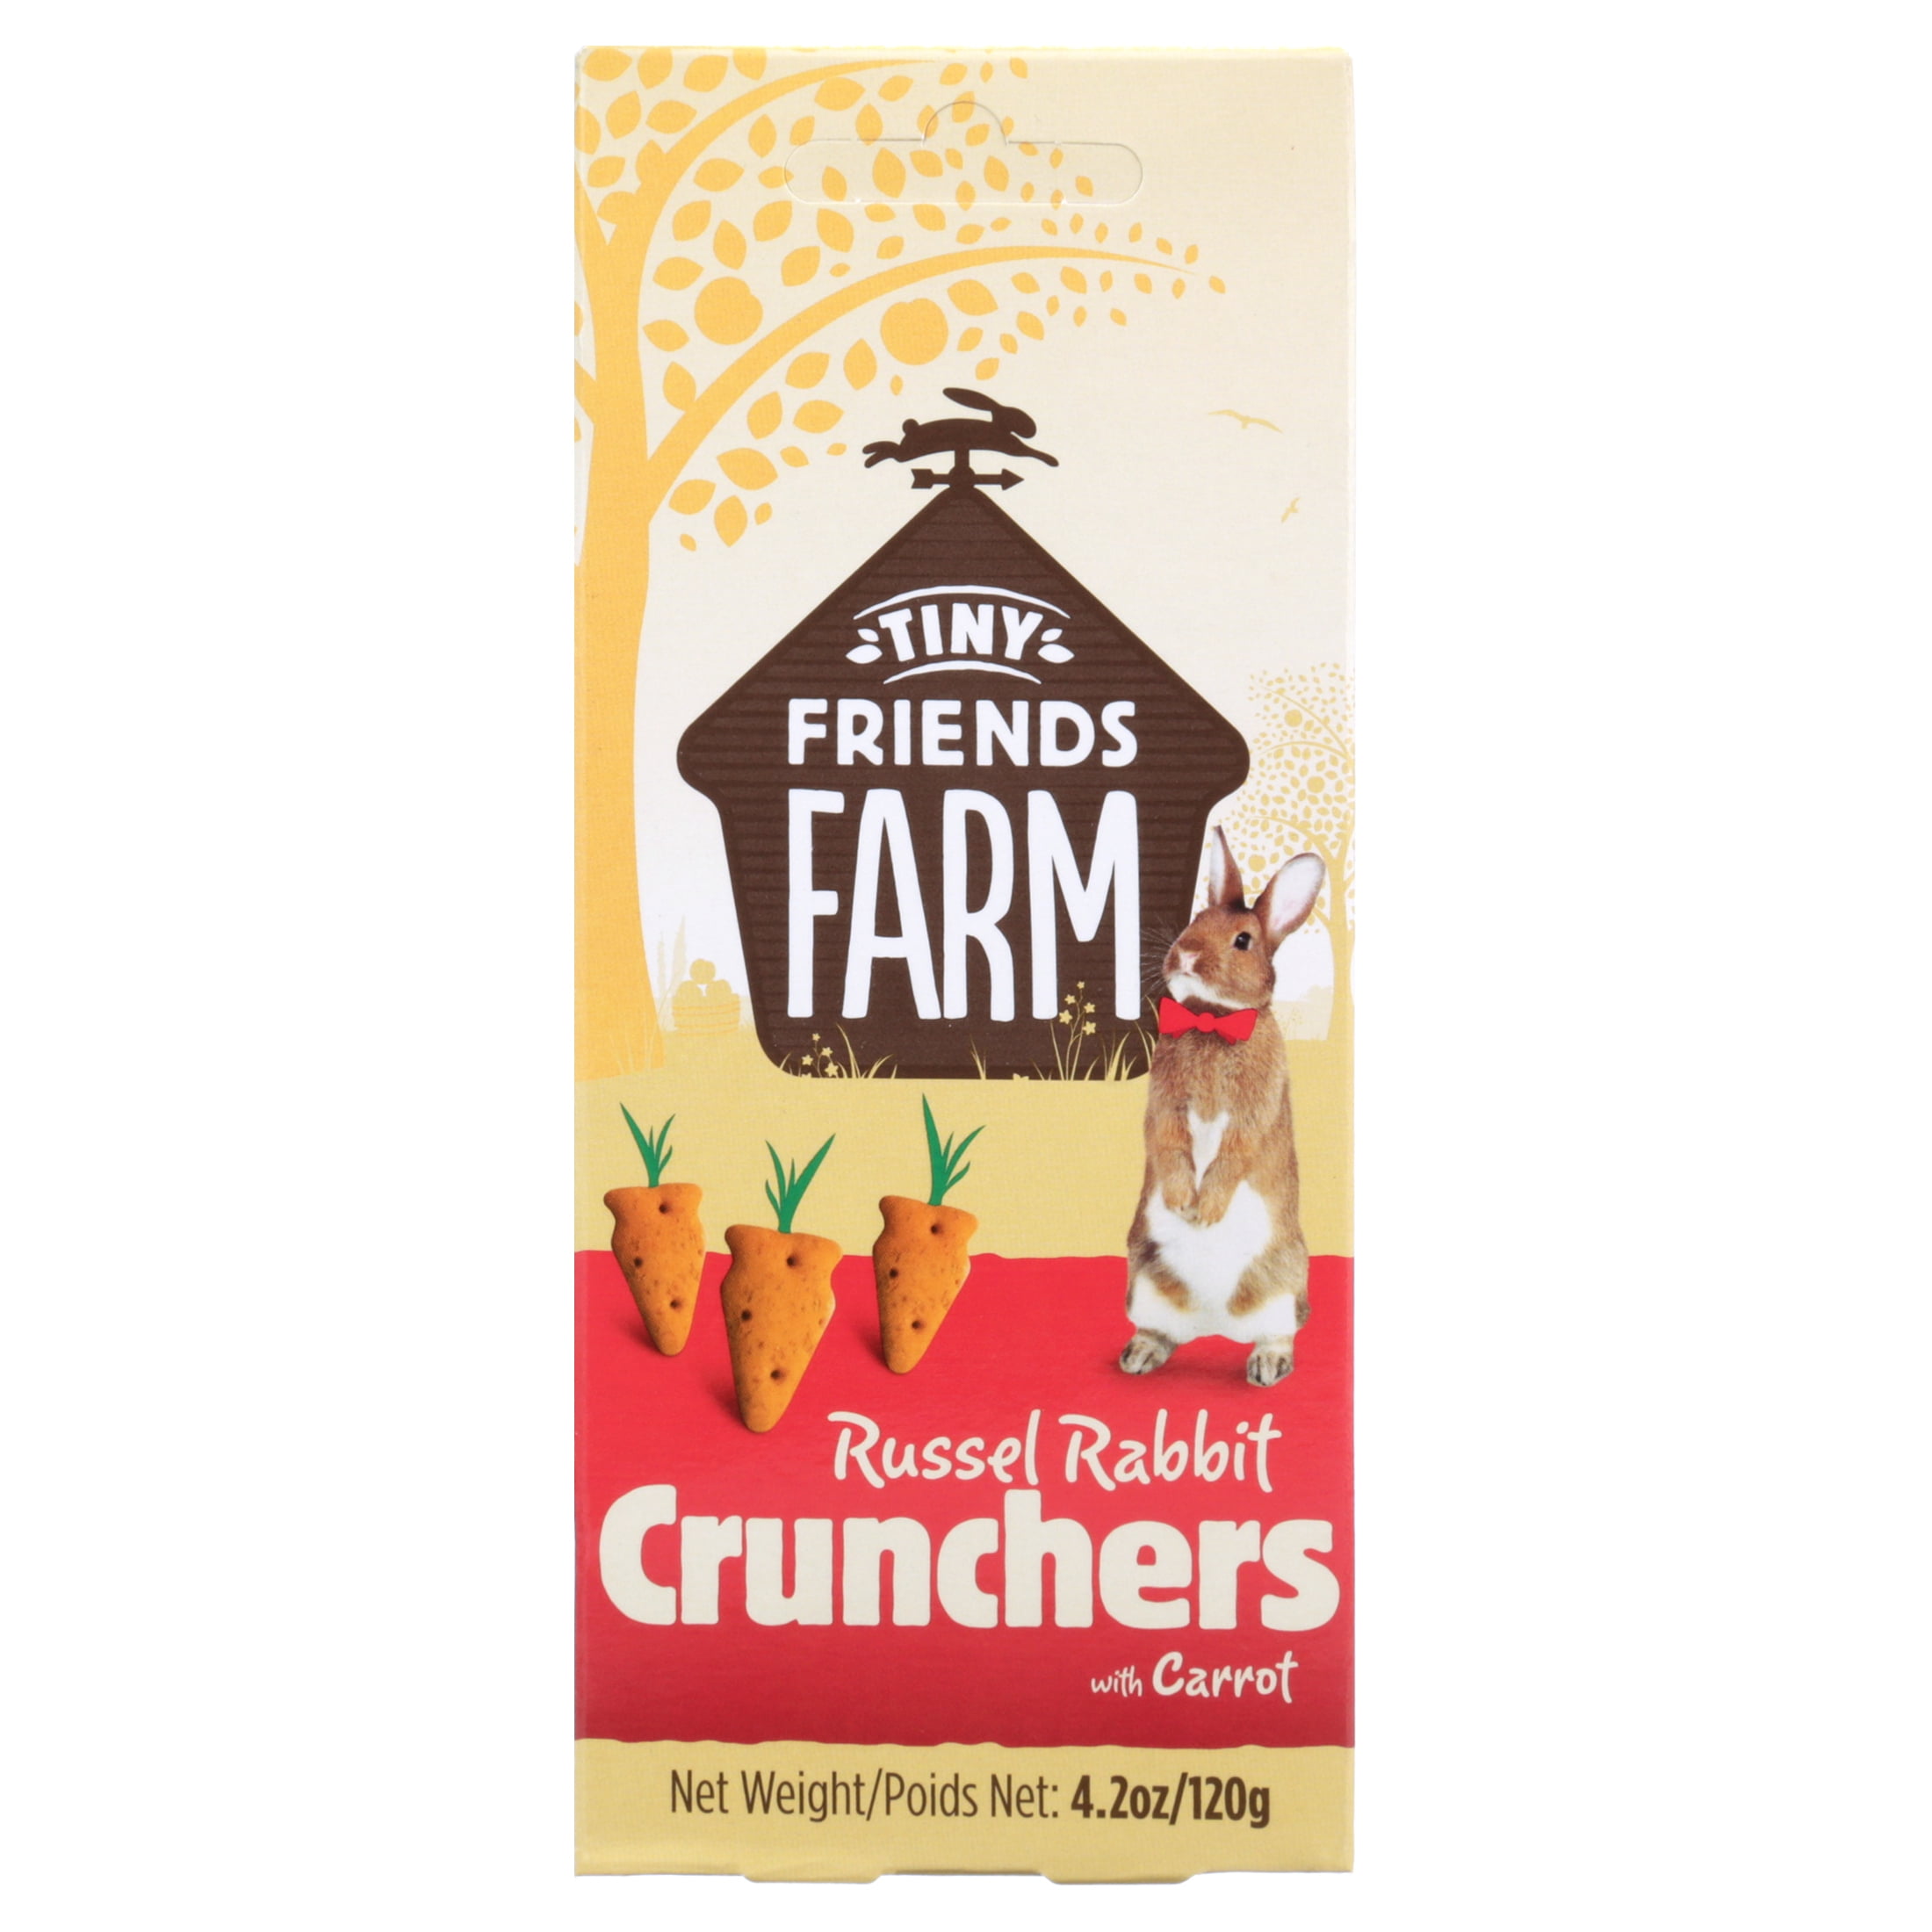 Su20545 Premium Crunchers Carrot Healthy Baked Bites For Rabbits - 4.2 Oz